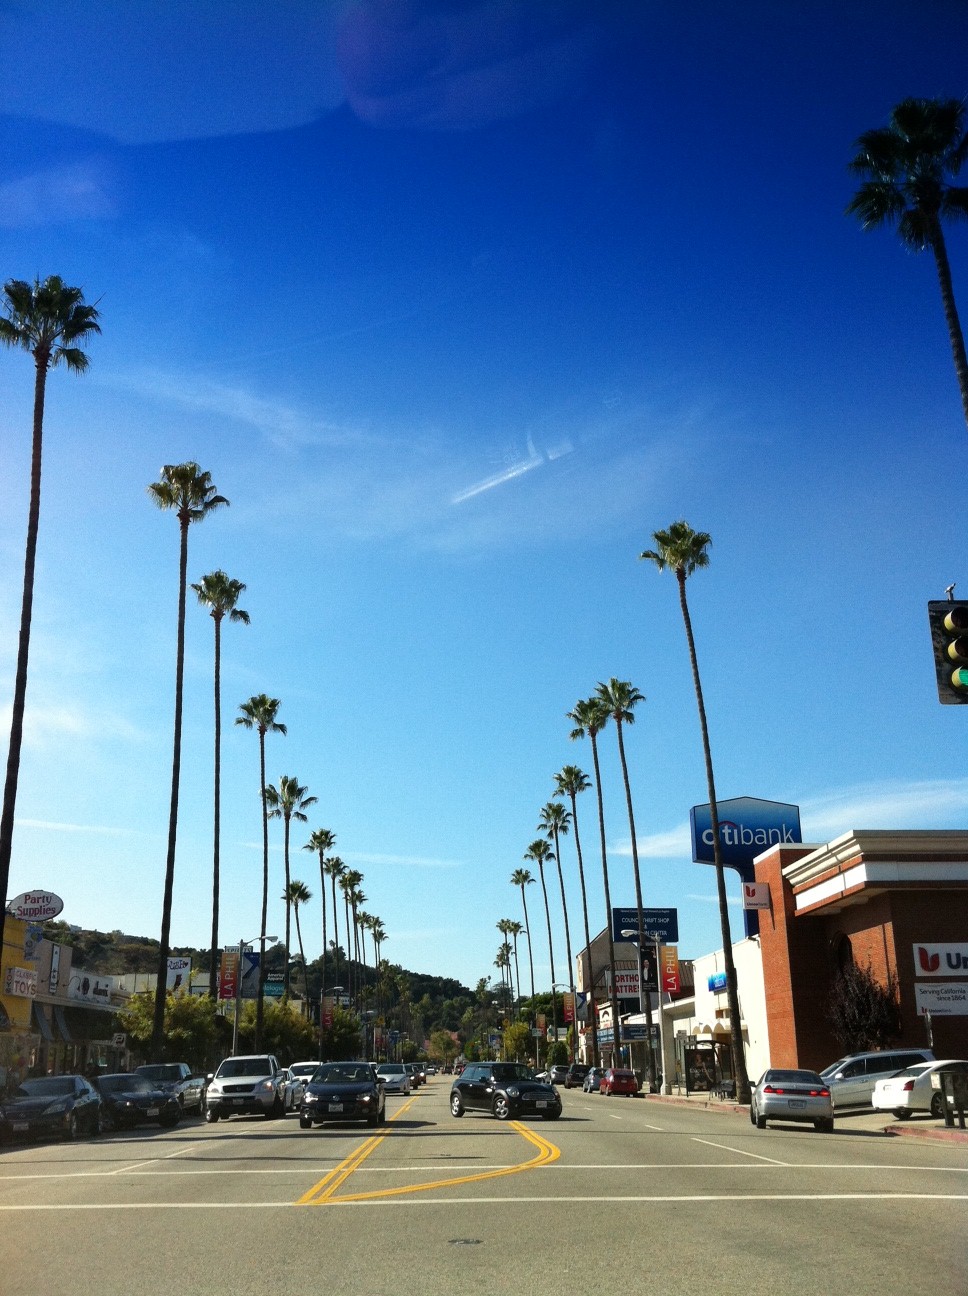 Home Sweet Hollywood: October 2012